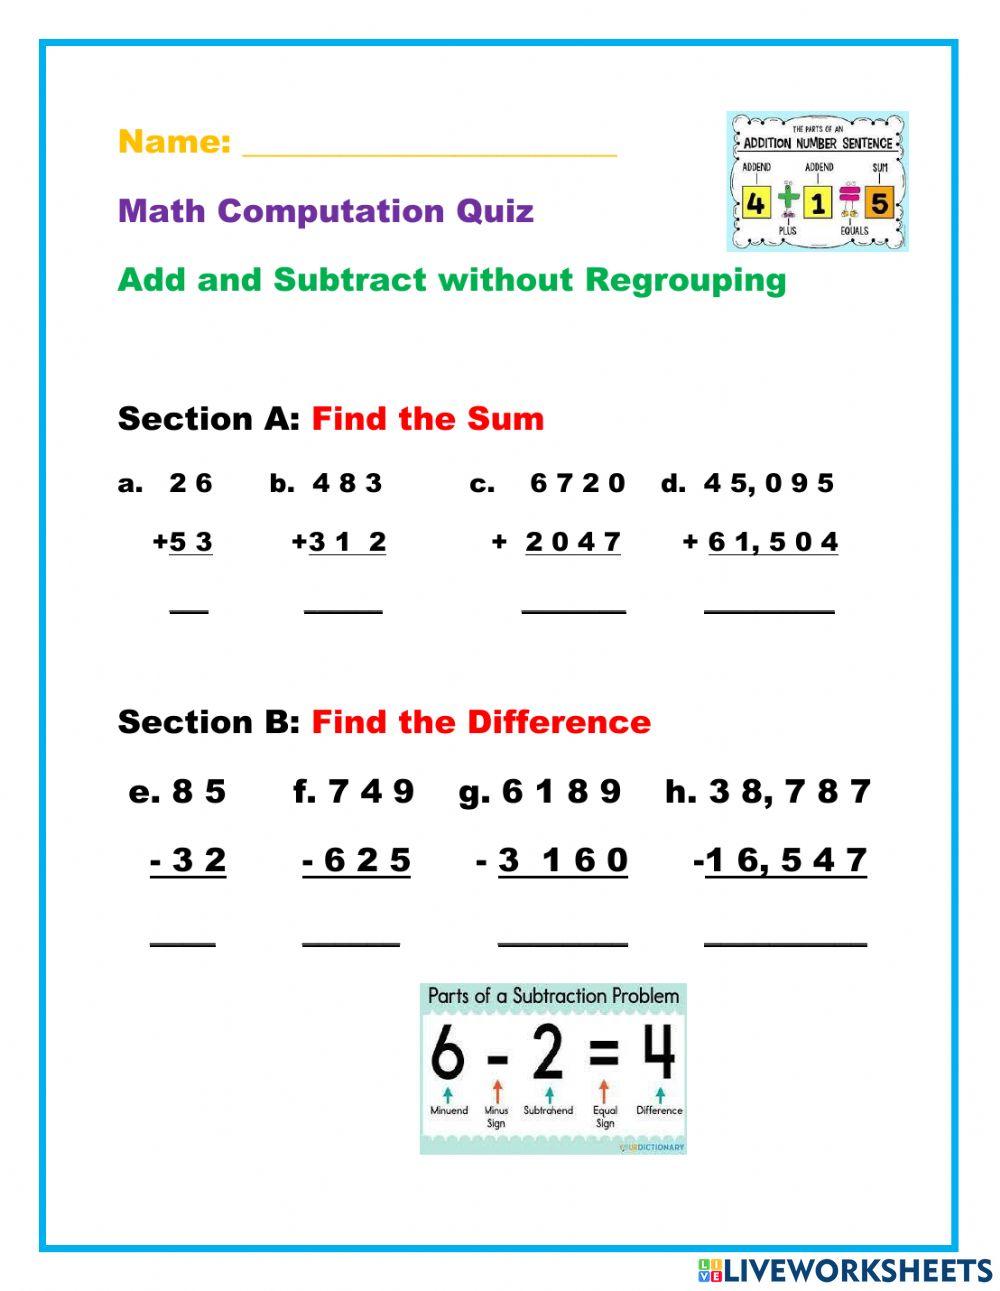 Add and Subtract without regrouping